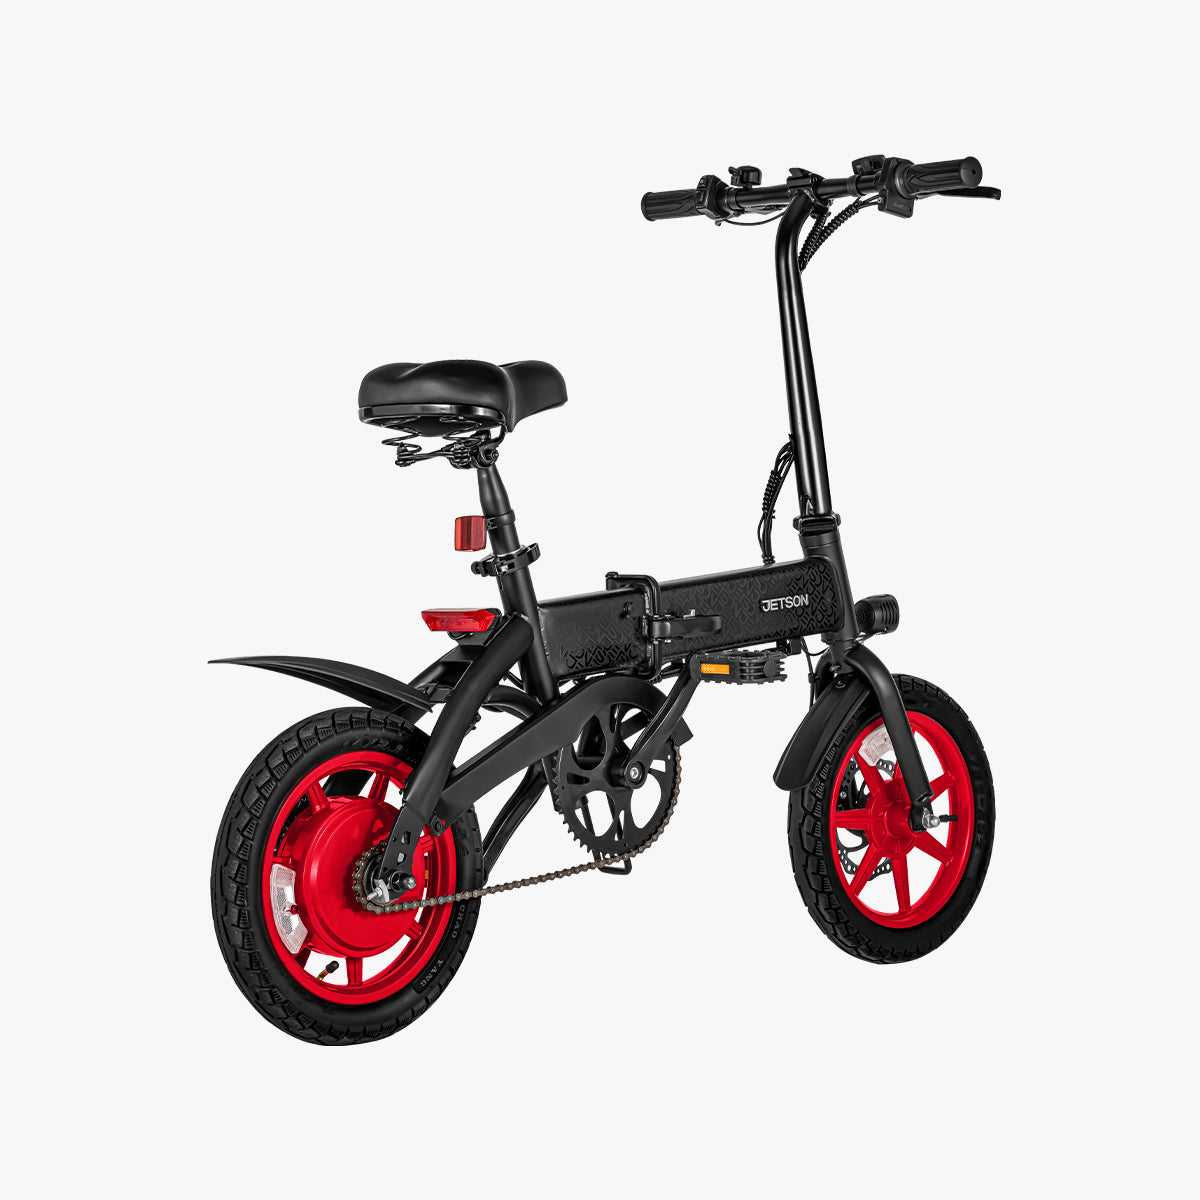 Arro electric Bike facing to the right and angled slightly 